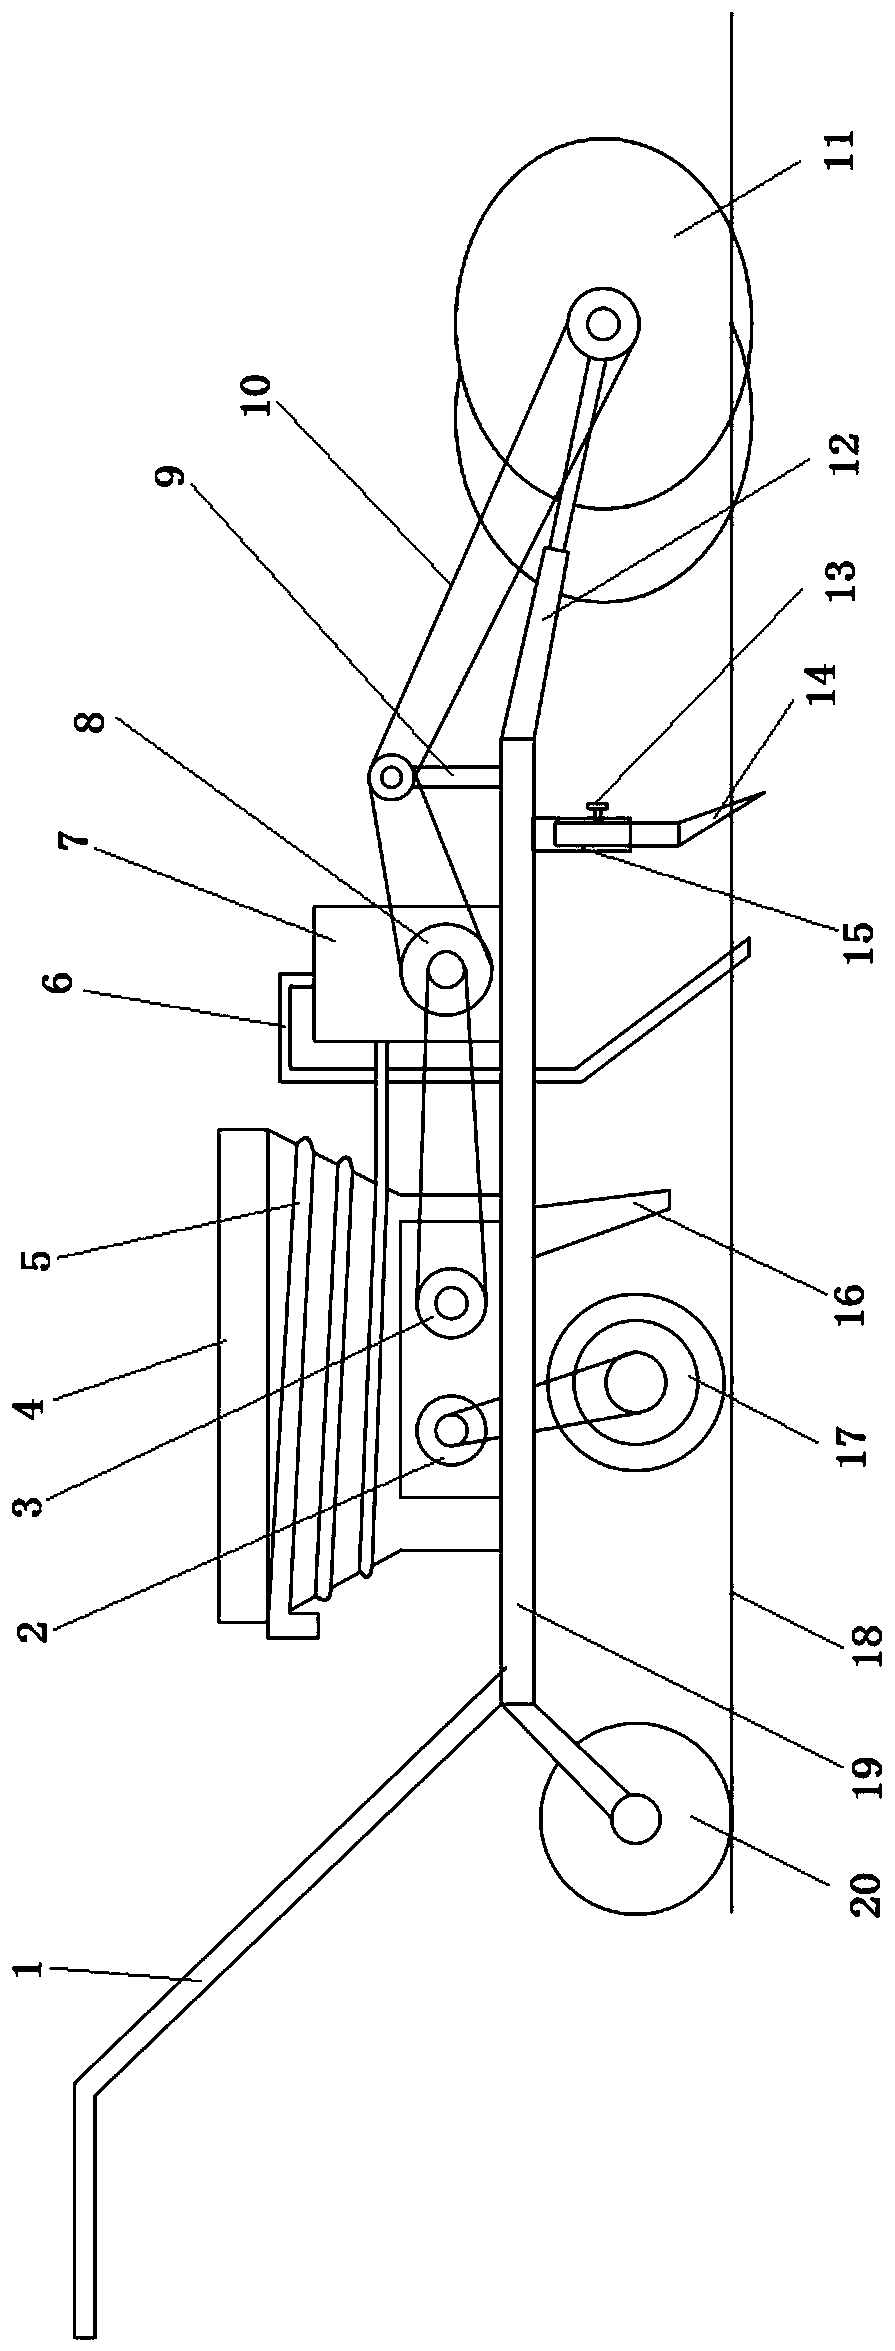 Pavement repairing device and technology